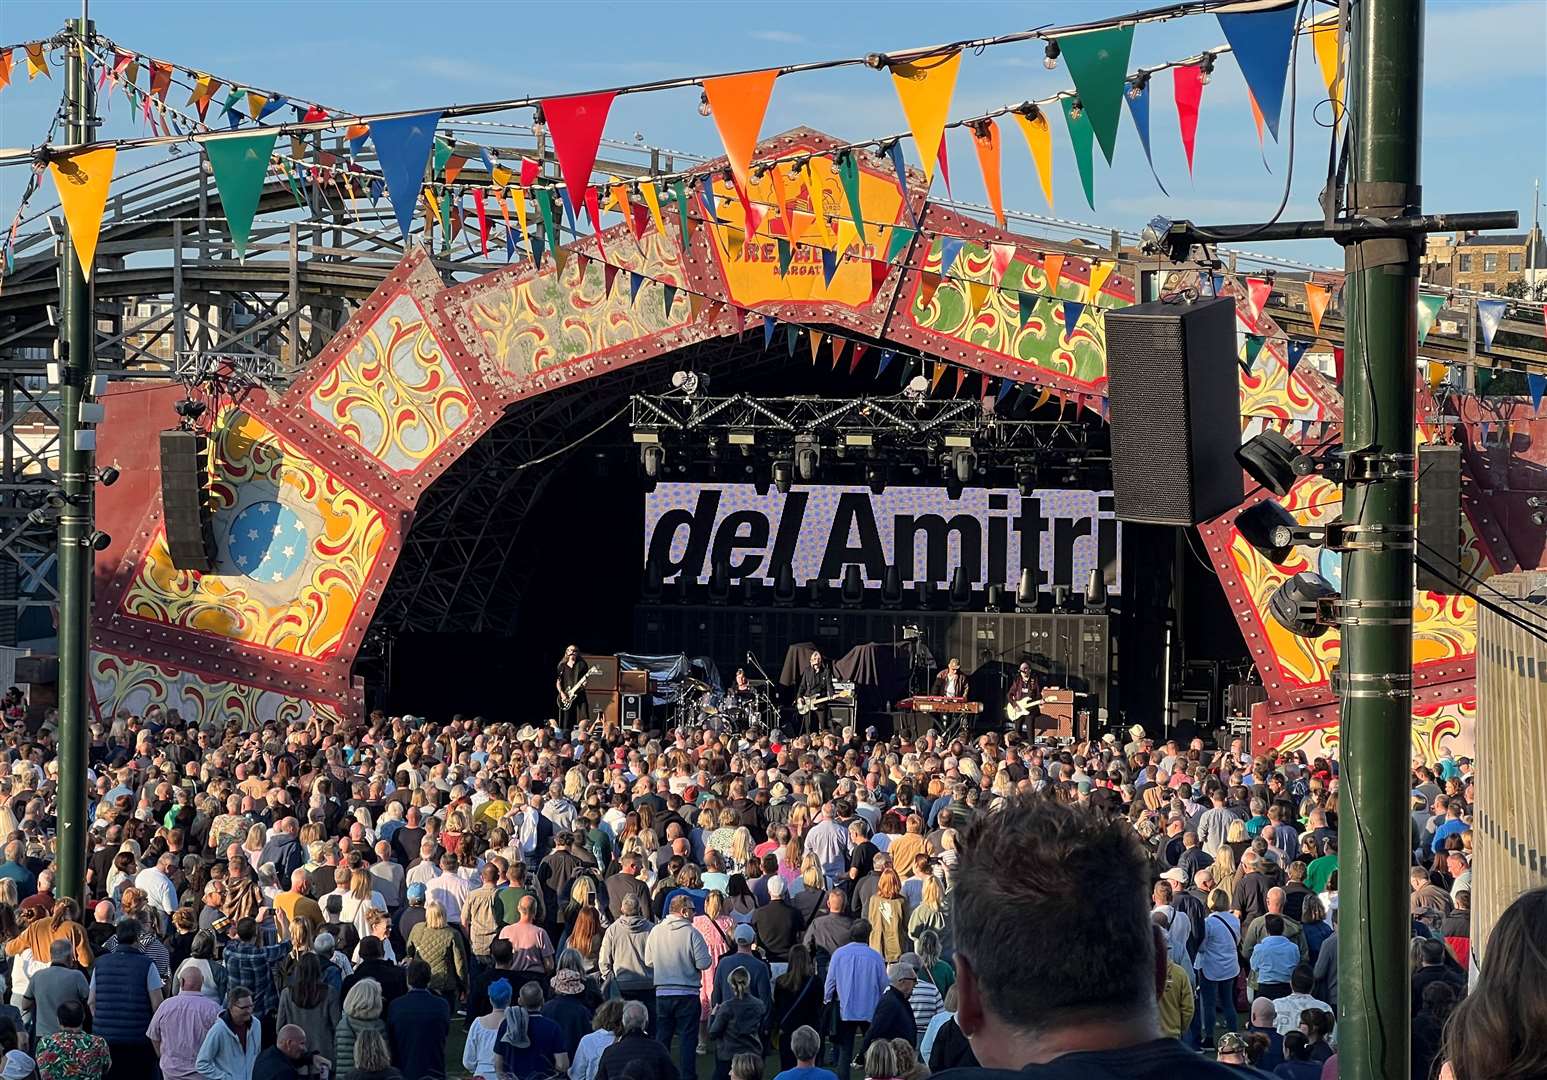 Del Amitri kicked things off and were excellent